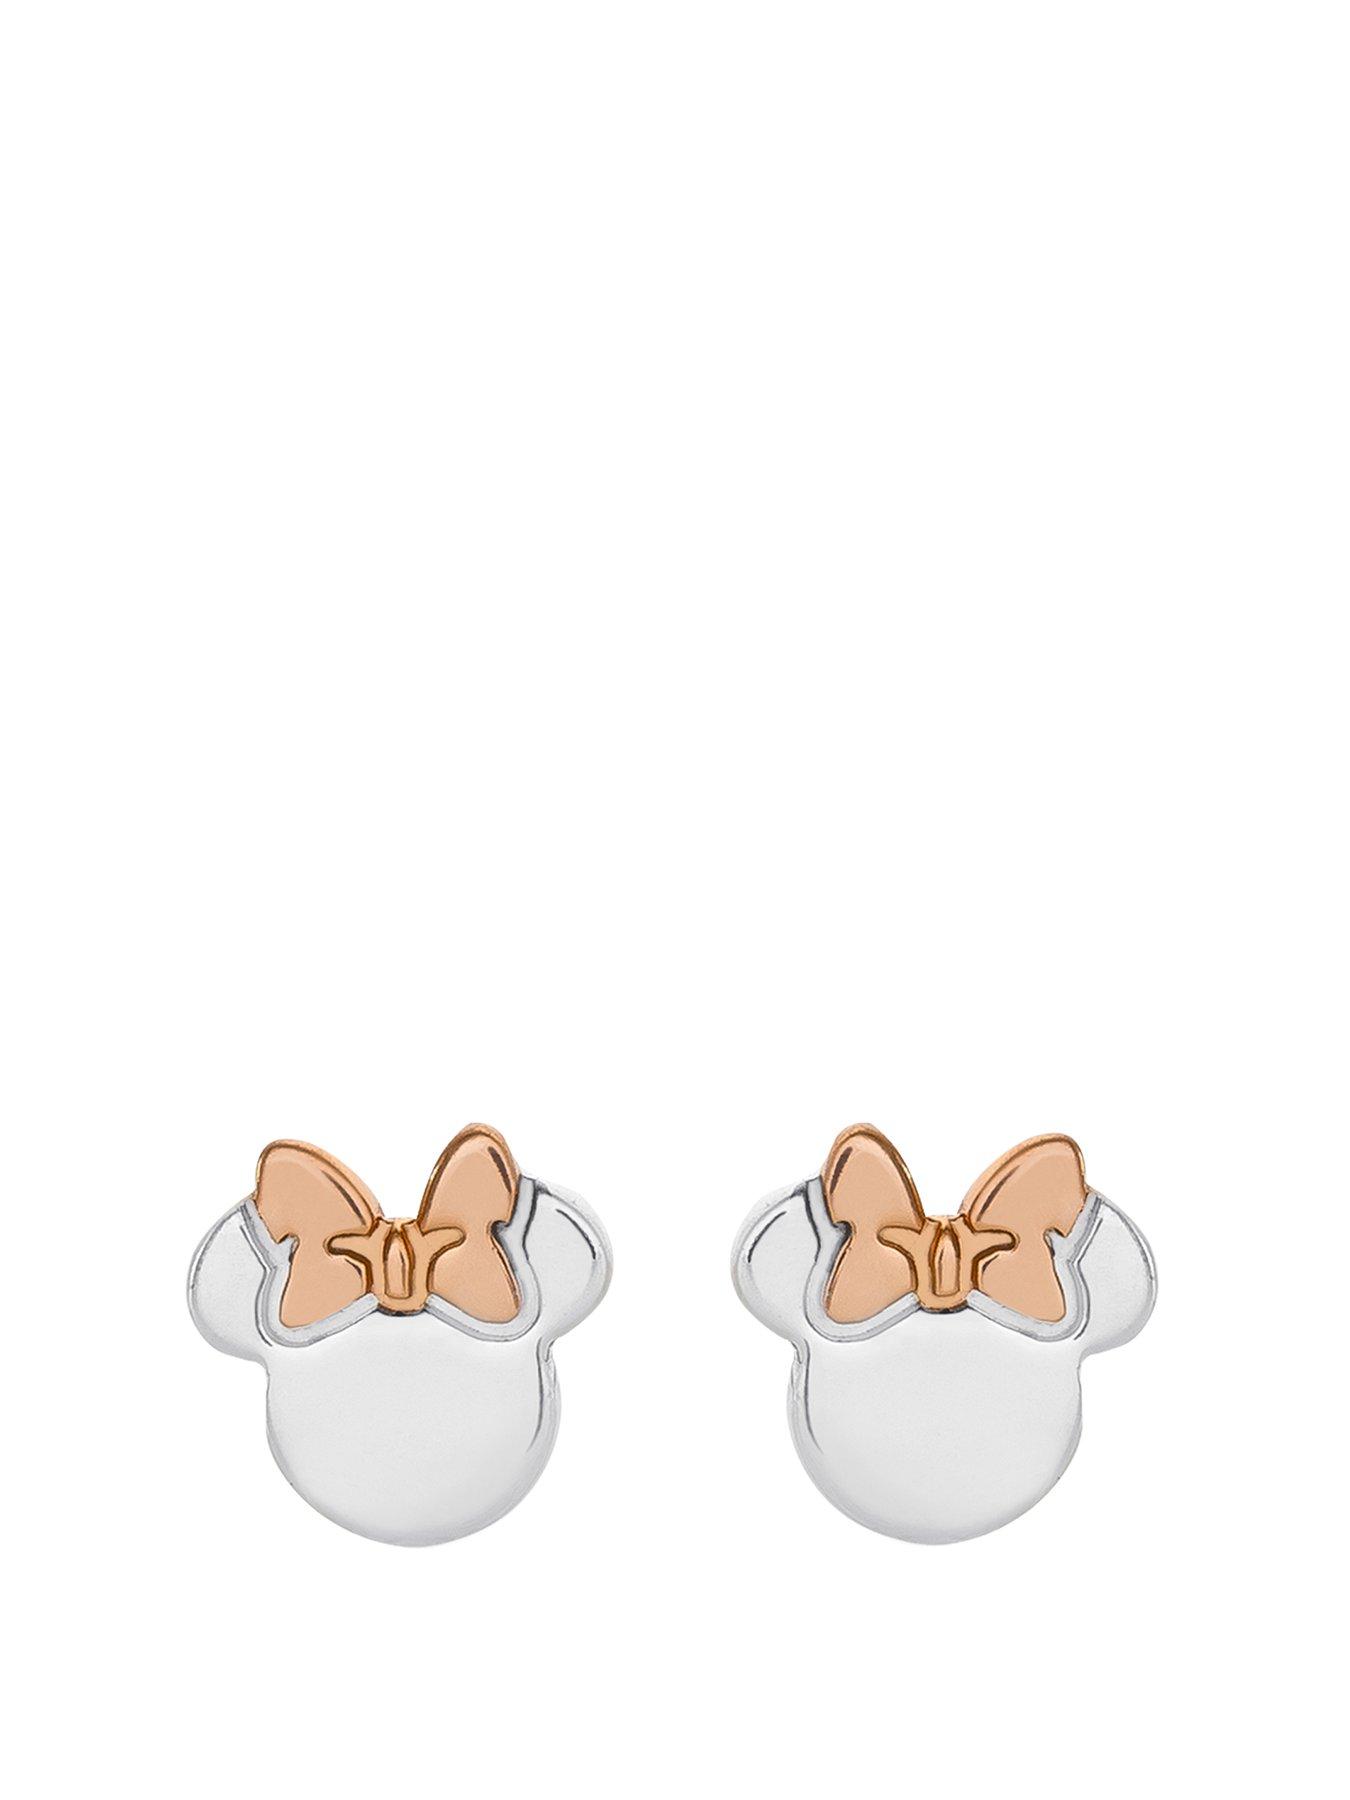  Minnie Mouse Sterling Silver and Rose Gold Bow Stud Earrings